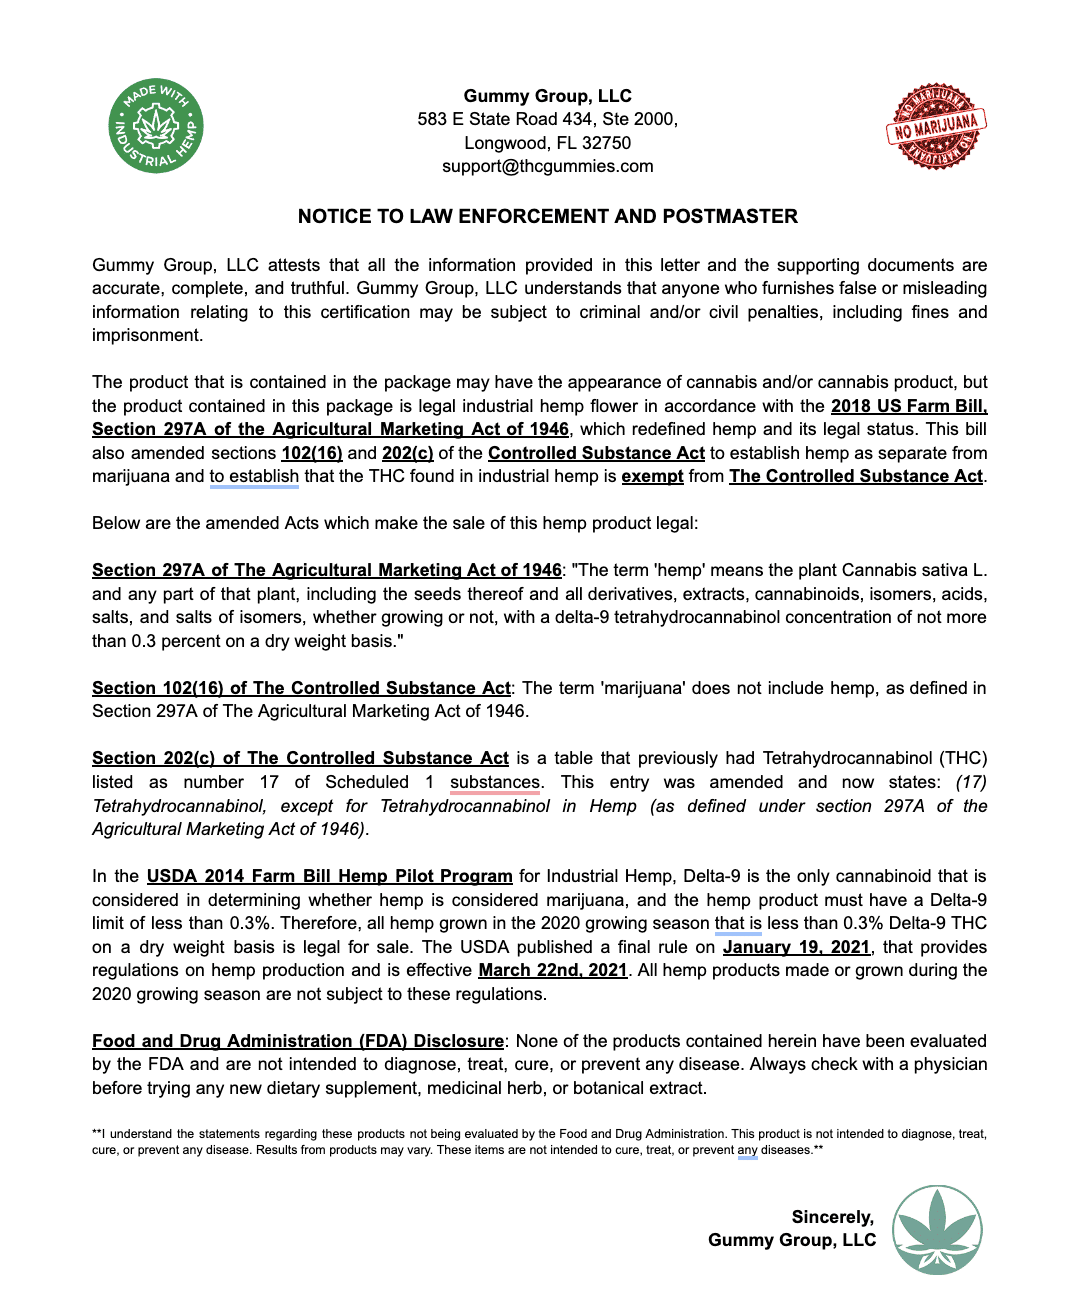 A document for law enforcement officers and postmasters that share several acts and bills that have been signed and passed by the federal government of the united states. This document clarifies any potential misunderstanding of the federal legal status of hemp-derived edibles gummies.